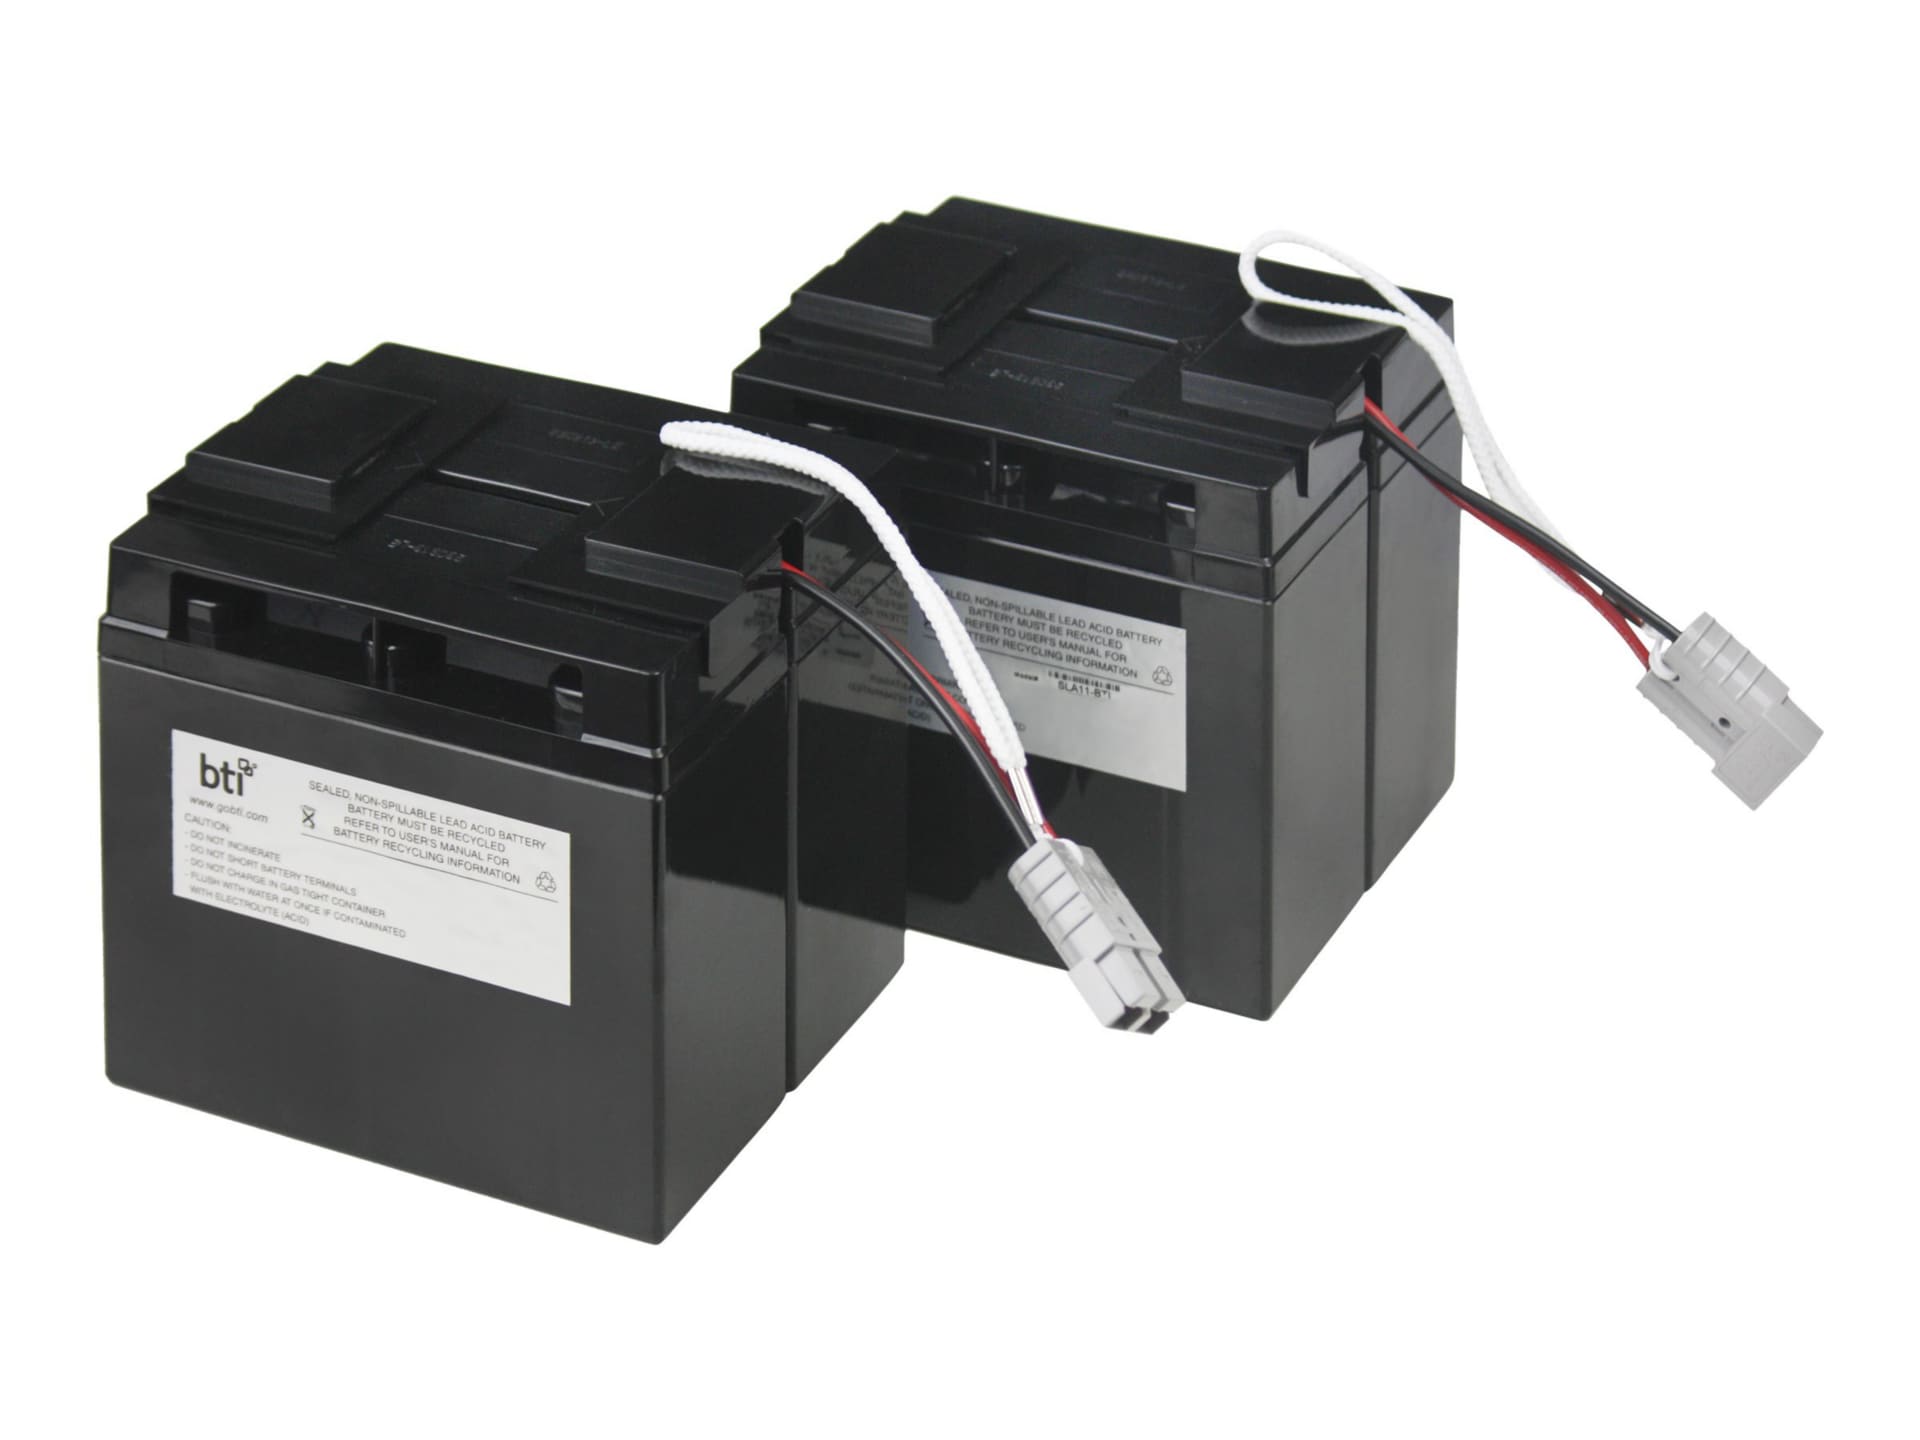 Battery Technology – BTI Replacement Battery for the RBC11 UPS Battery